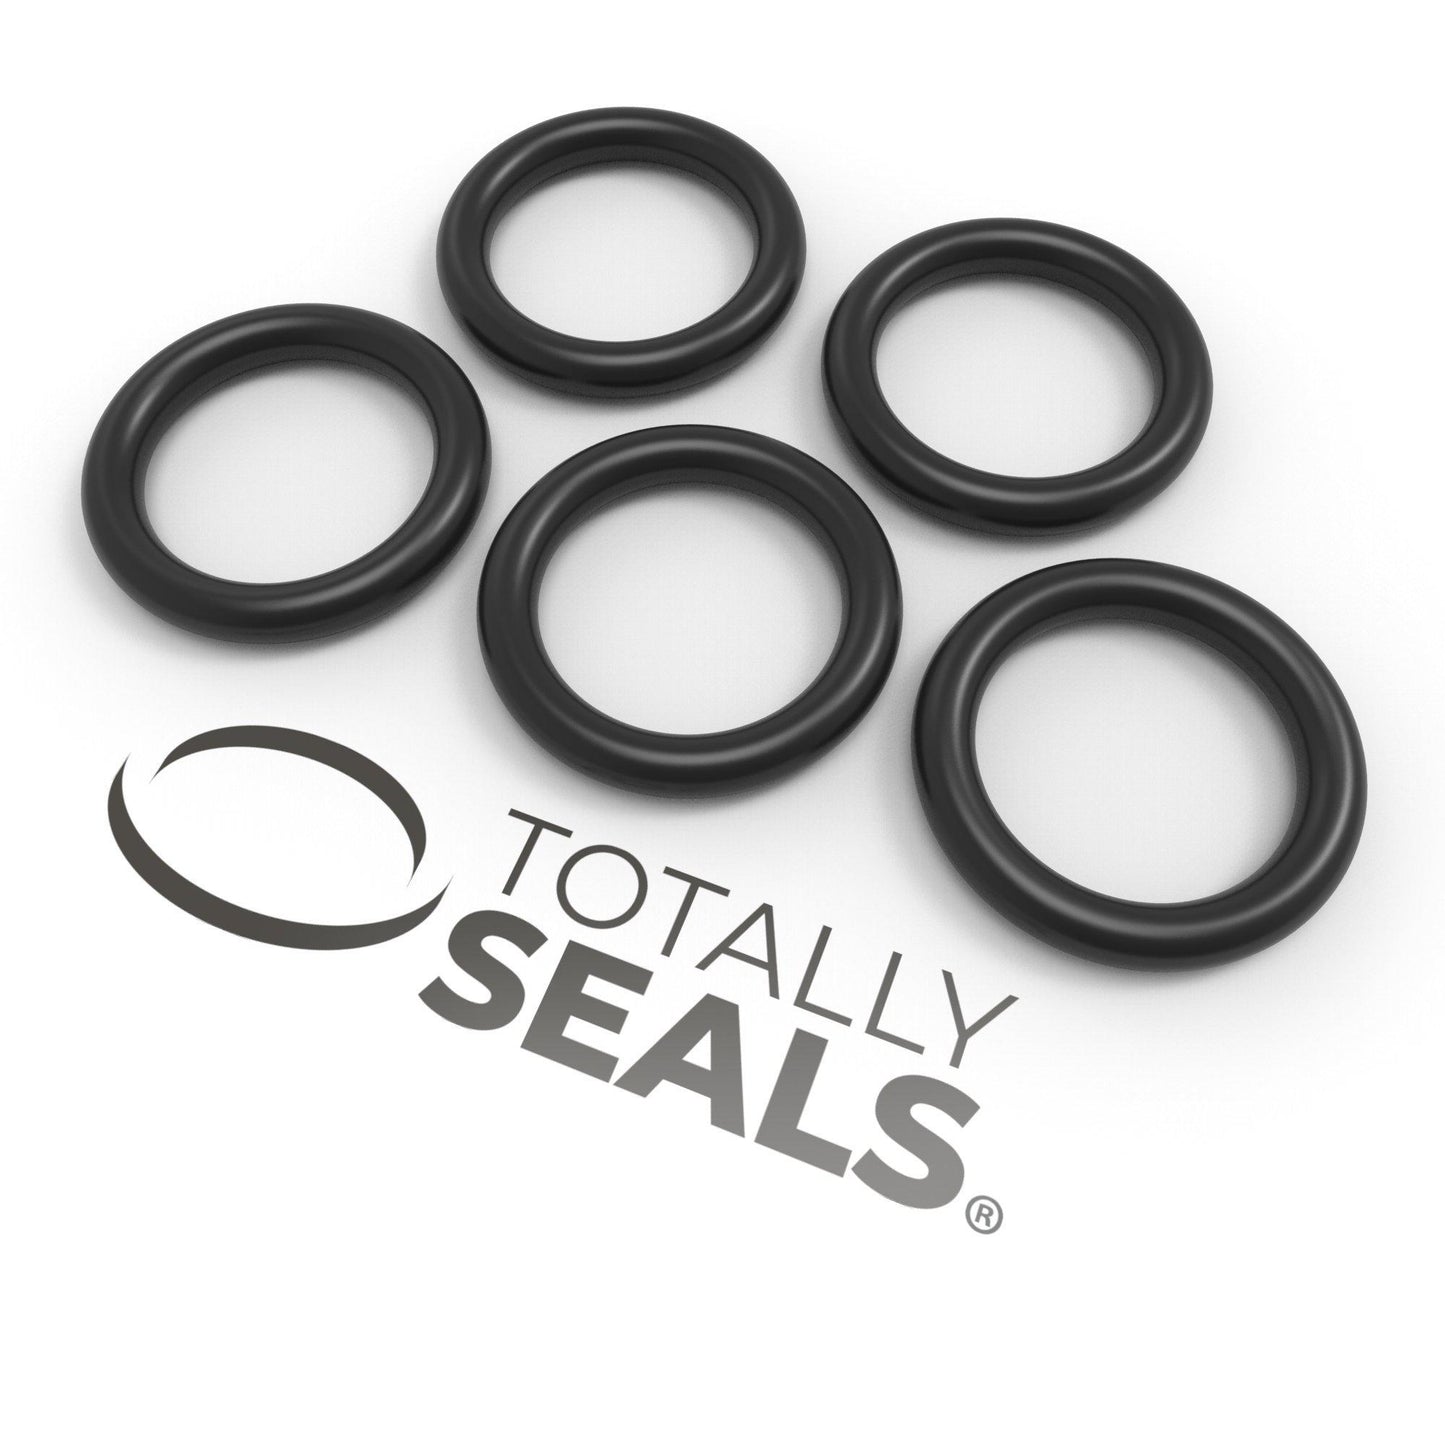 25mm x 1.5mm (28mm OD) Nitrile O-Rings - Totally Seals®